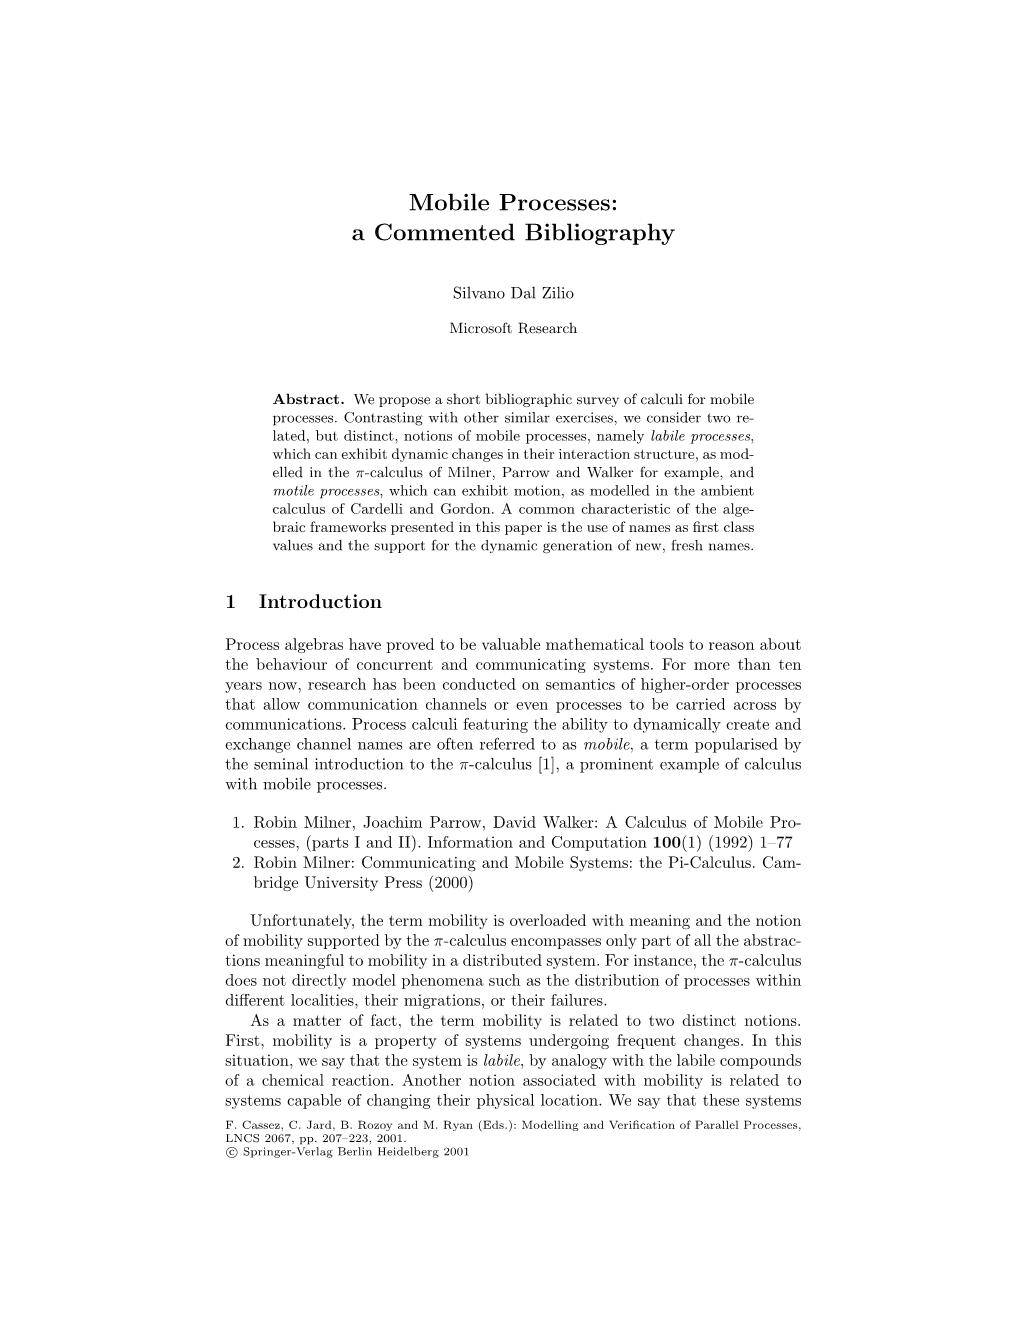 Mobile Processes: a Commented Bibliography